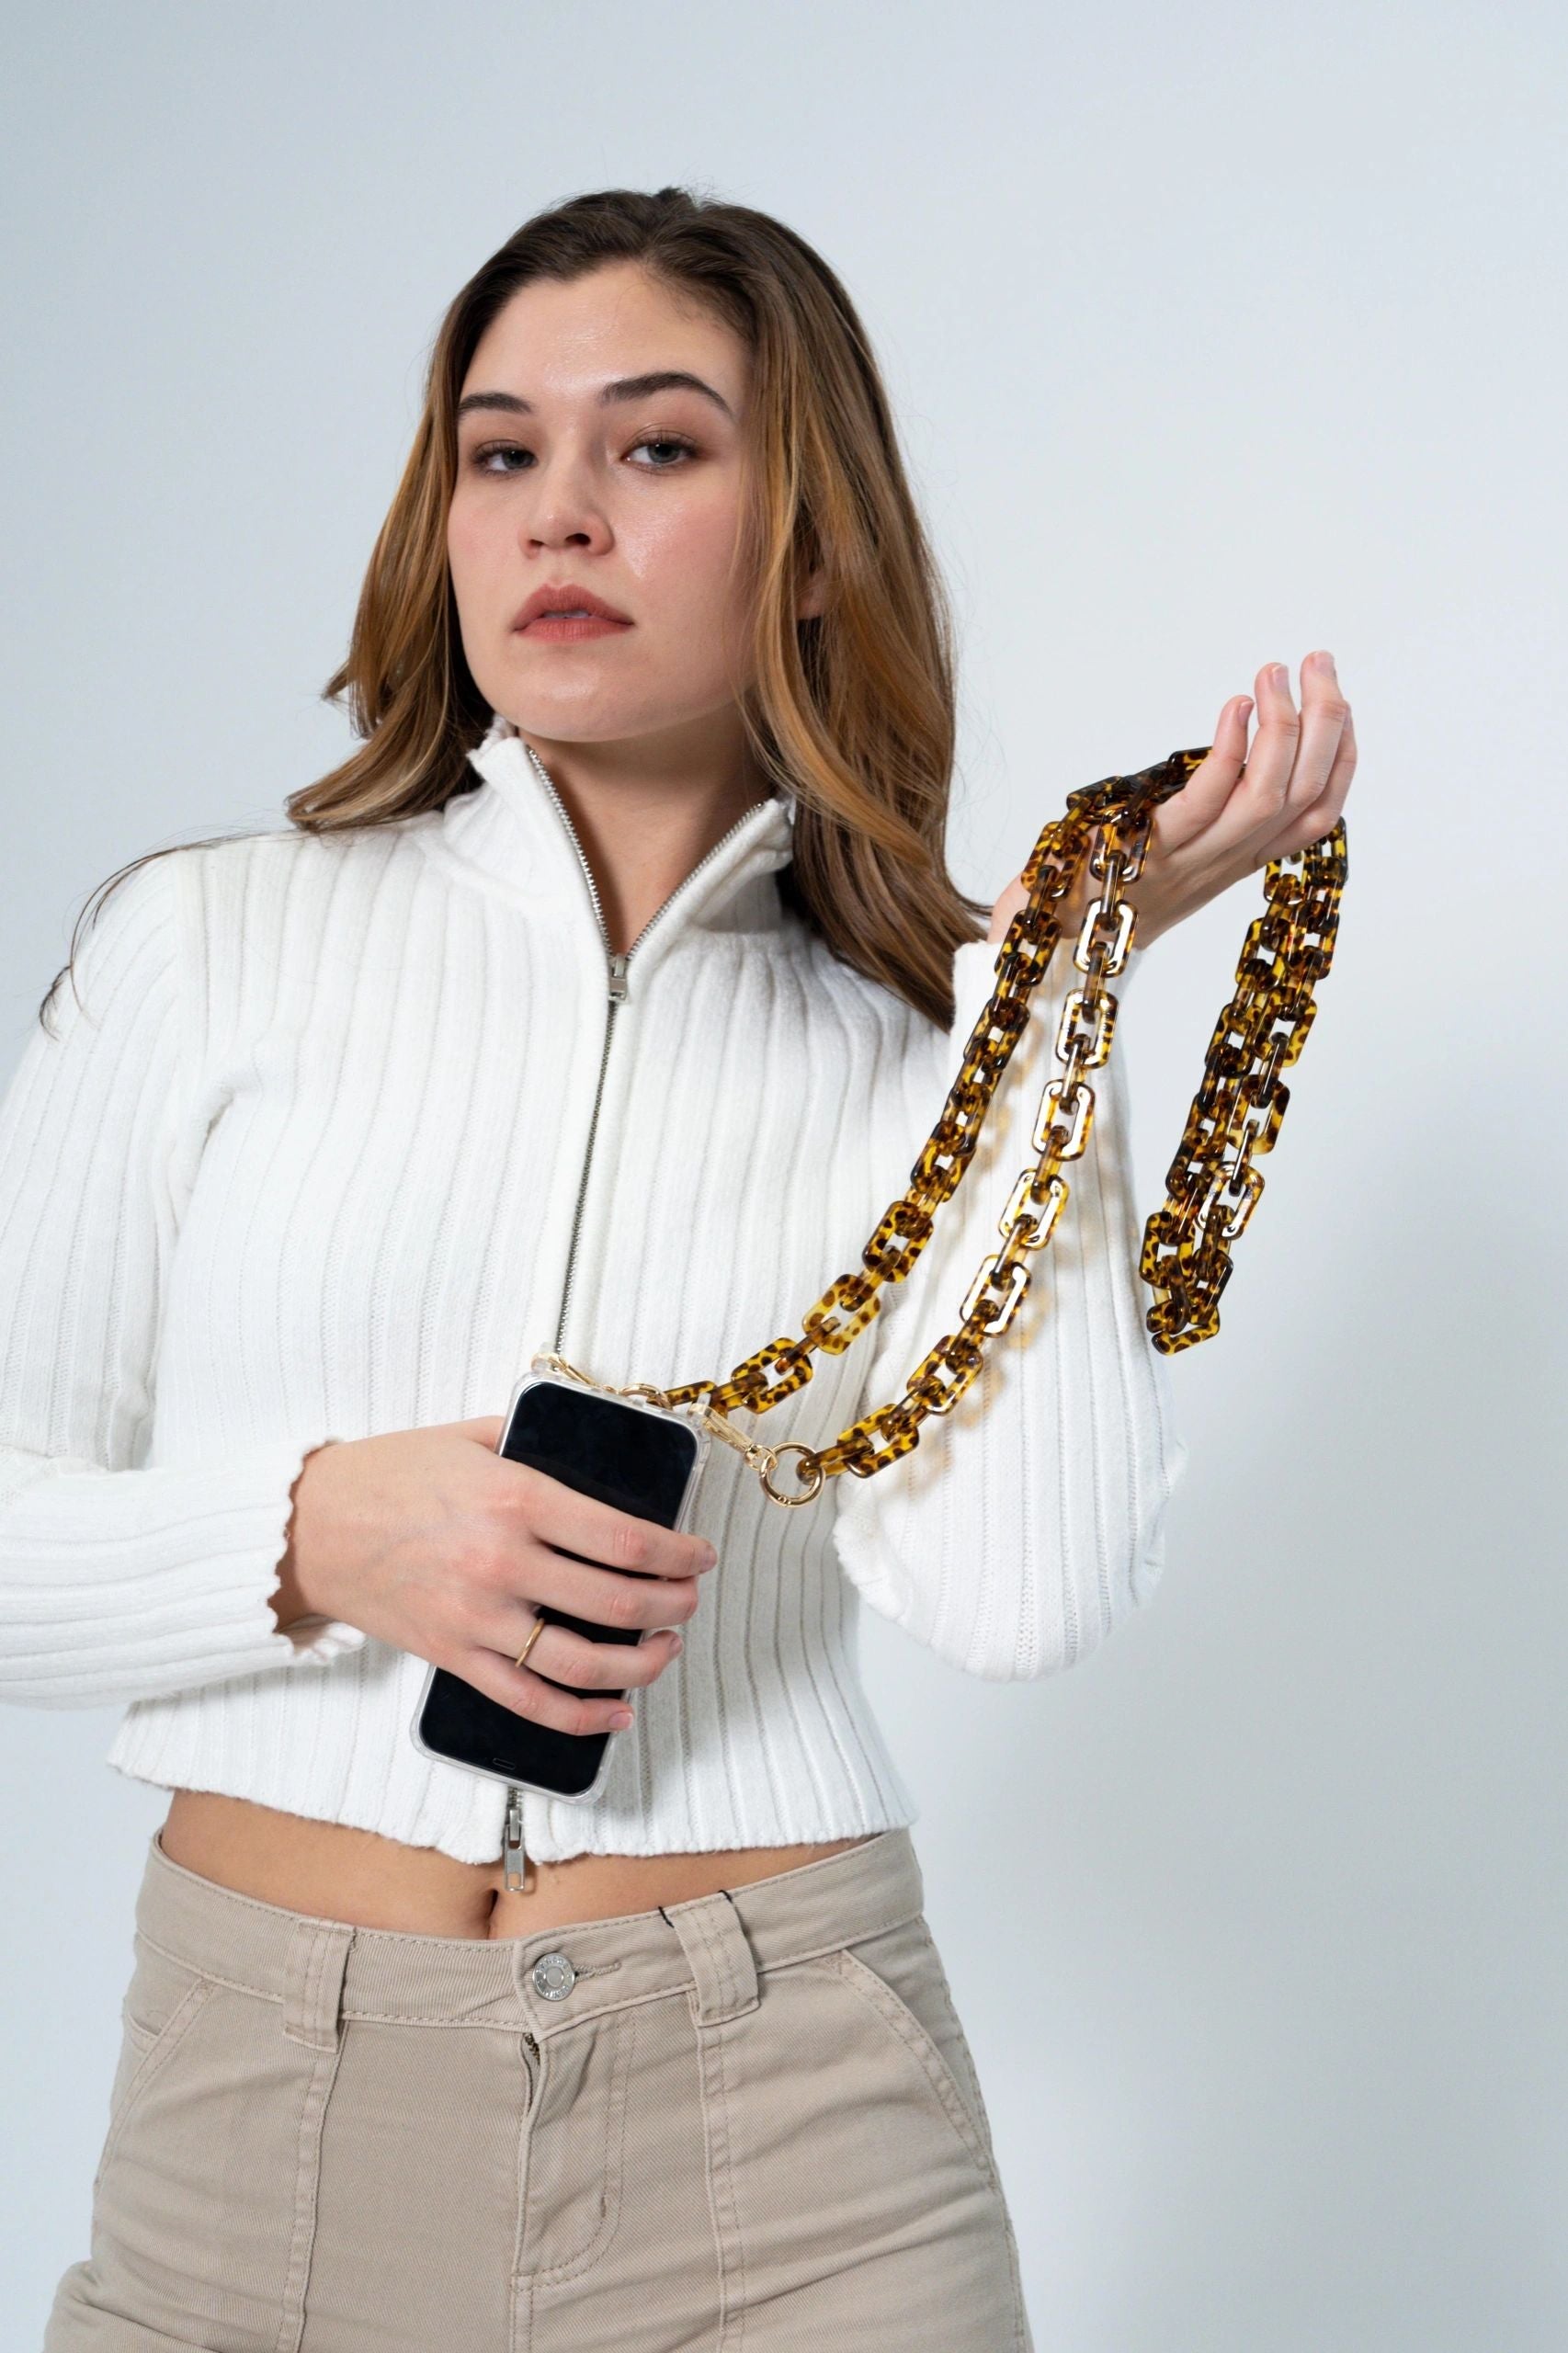 Brown Tortoiseshell Rectangular Resin Chain with Golden Carabiners attached to a phone carried by a lady on her hands